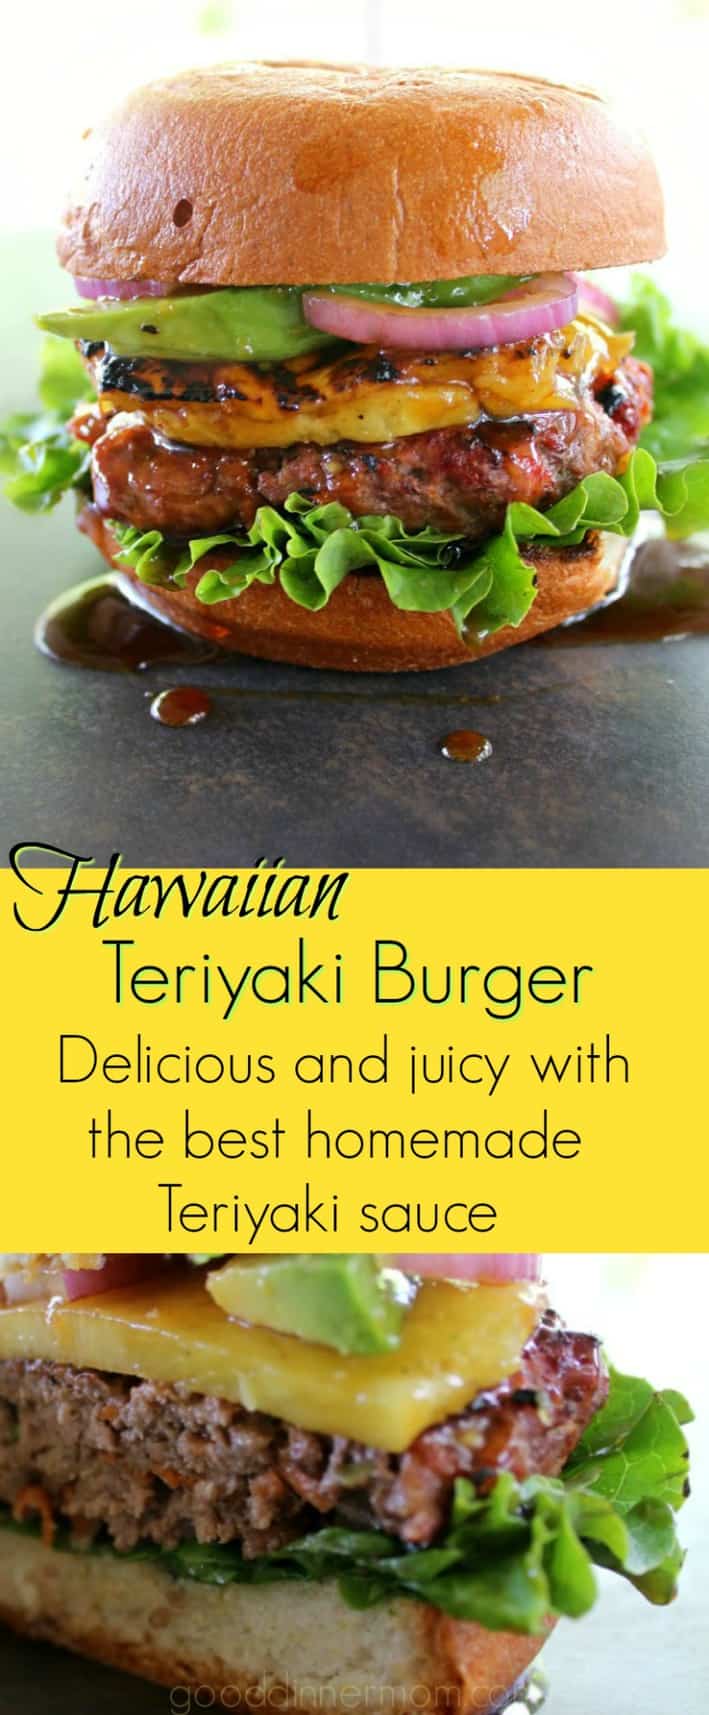 The meat for this delicious burger is infused with grated carrot, scallions, ginger, and just enough jalapeno. The perfect Teriyaki sauce is fresh and light. 